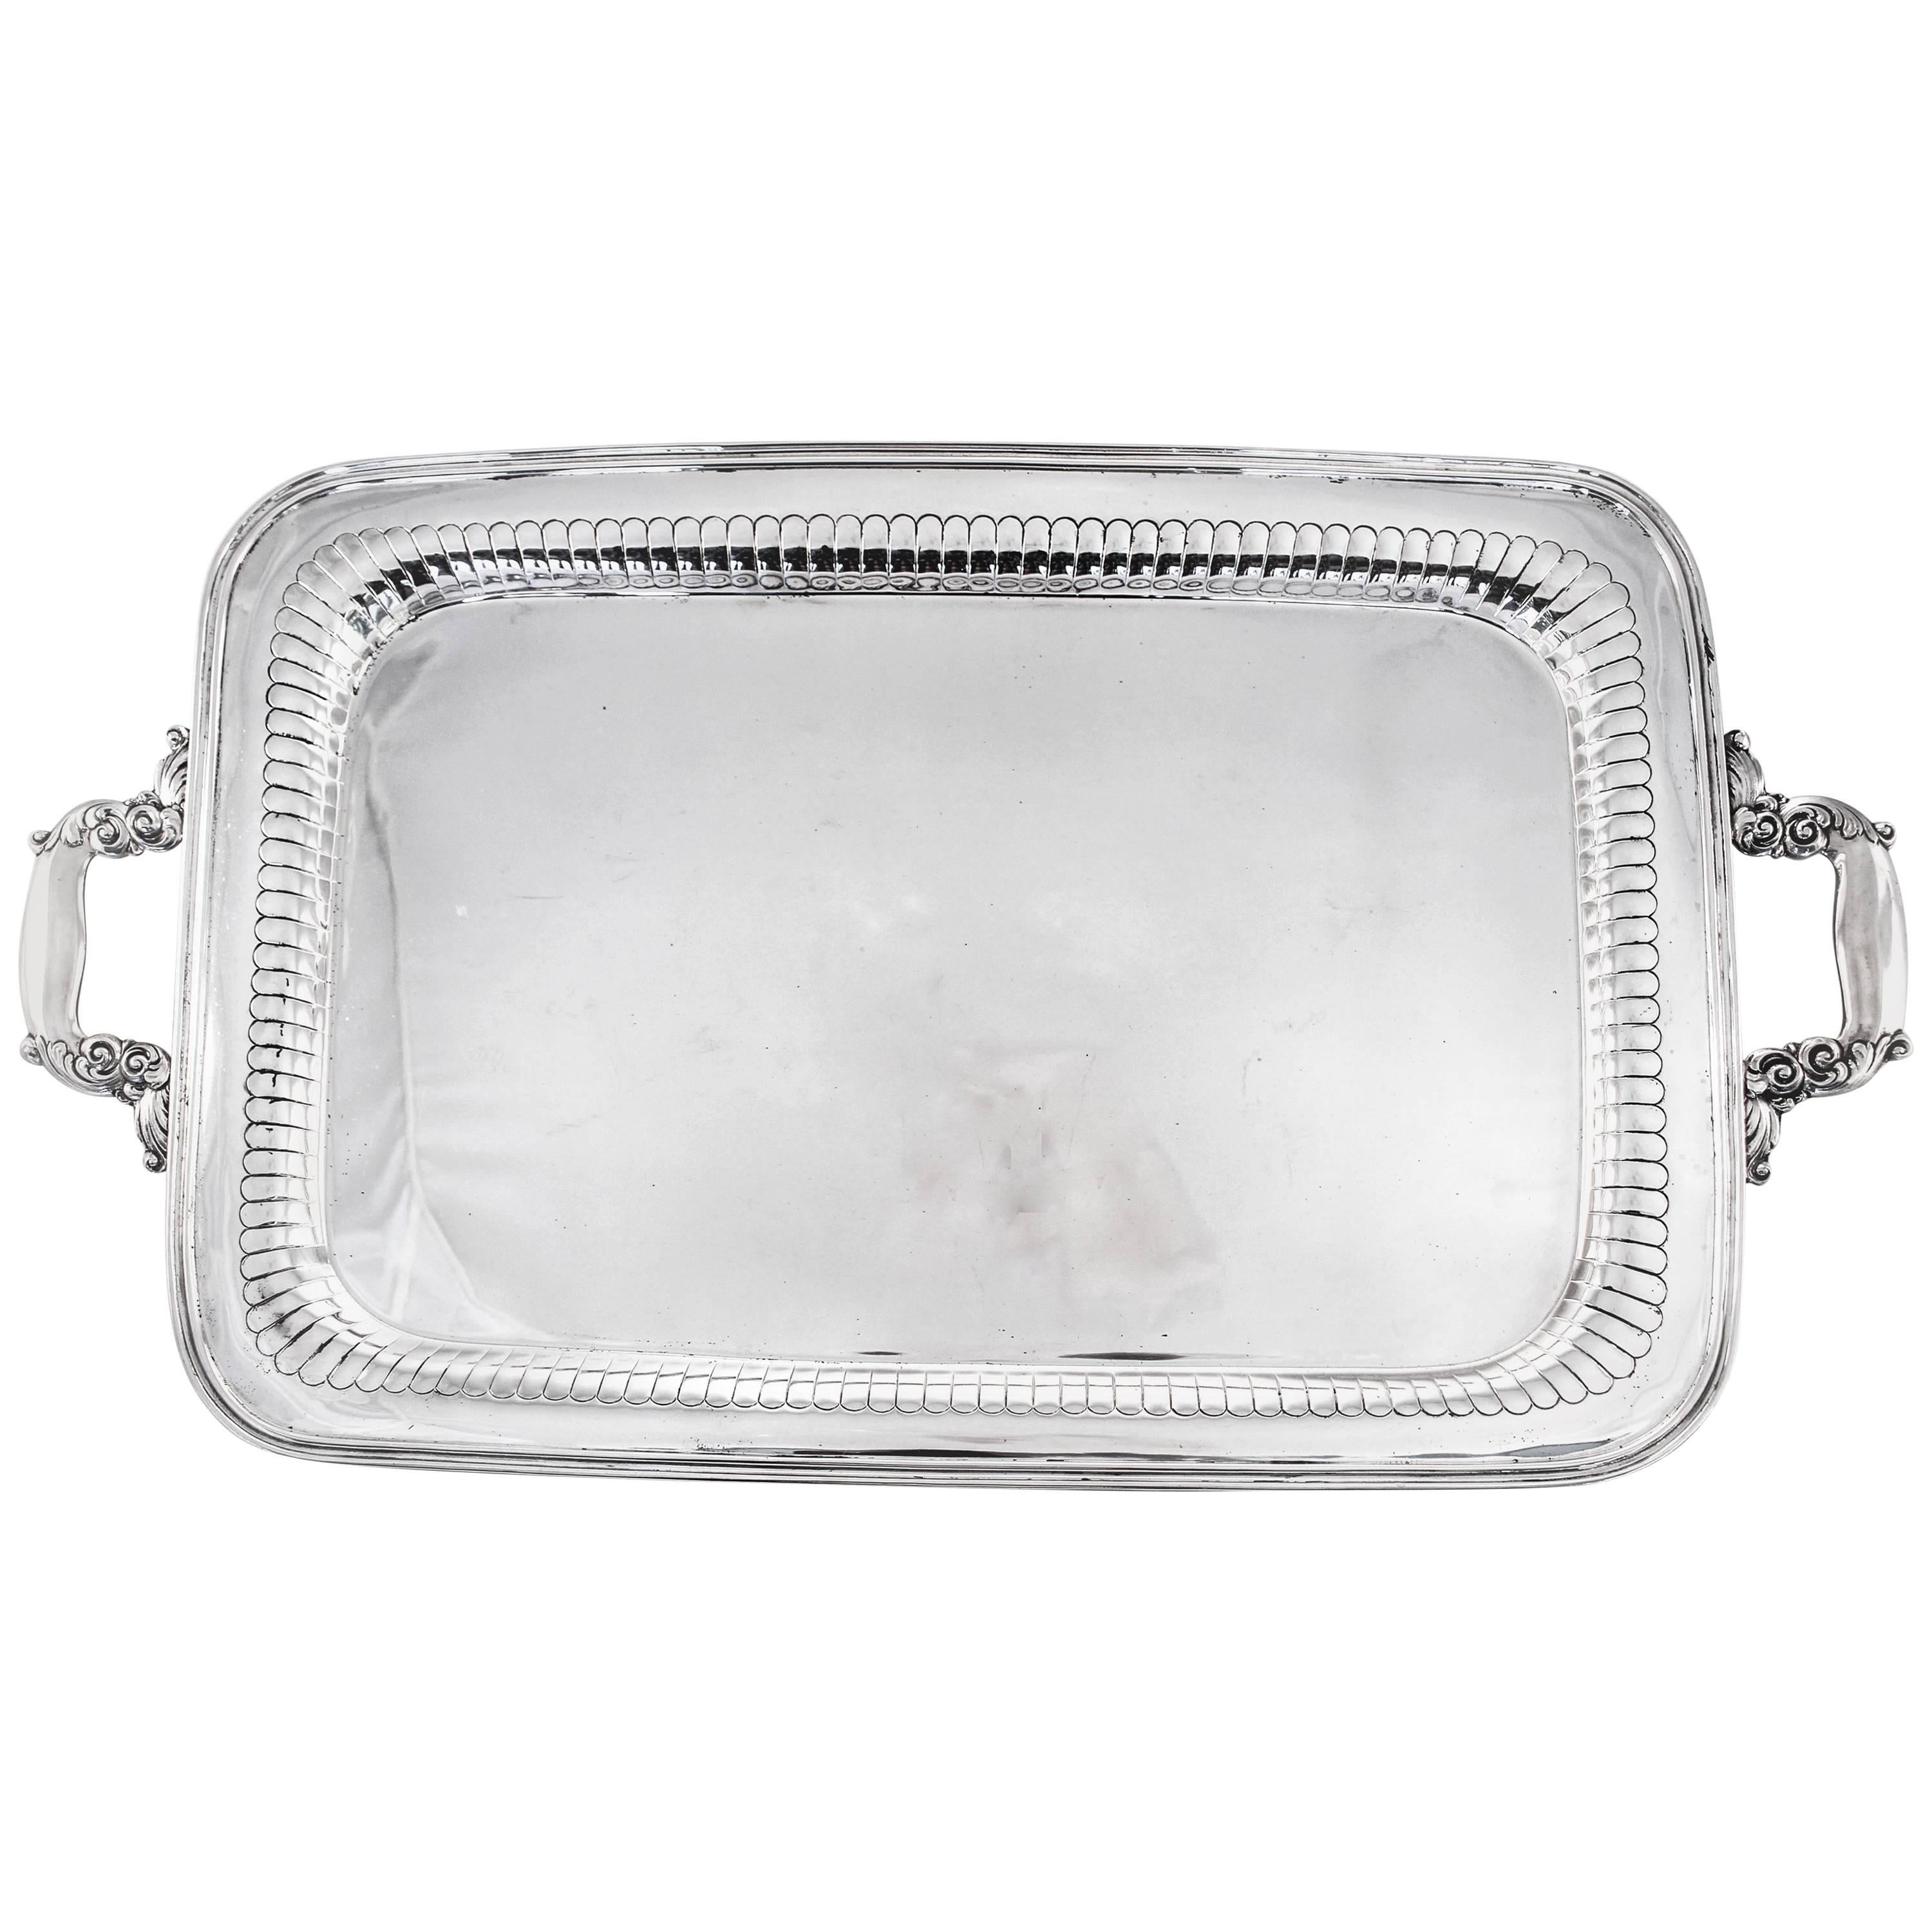 Large Serving Tray